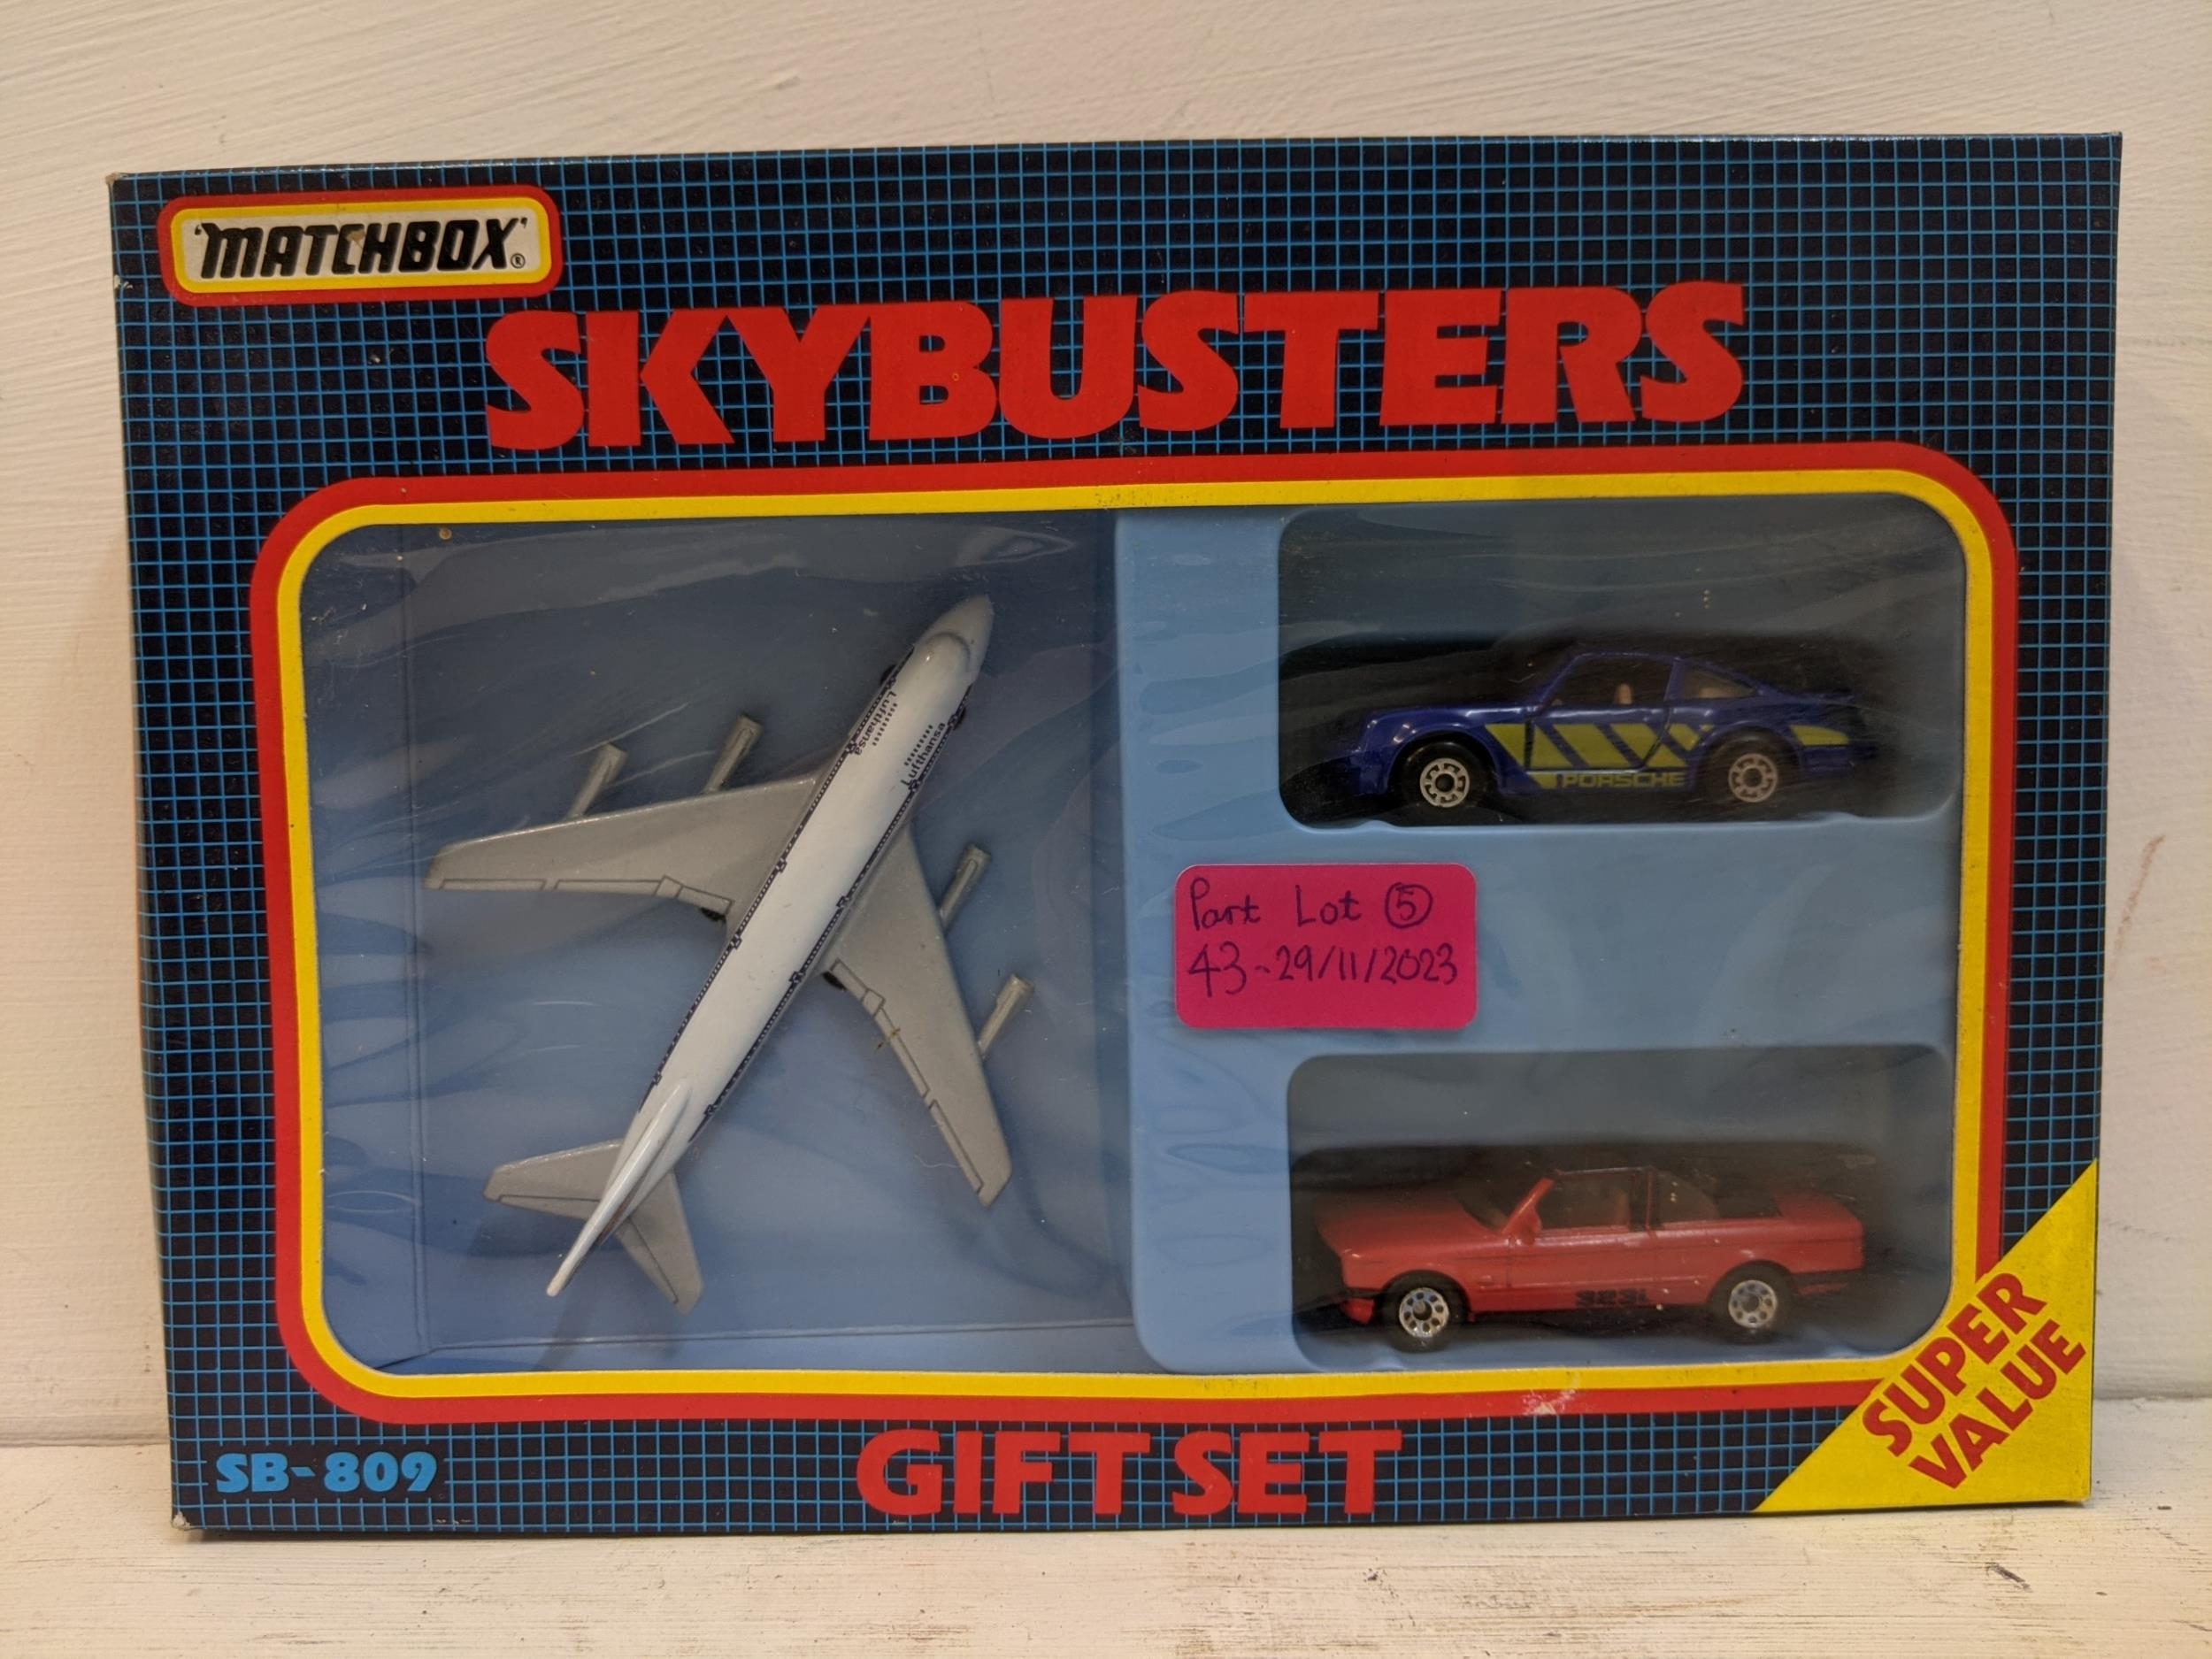 Five Matchbox Skybusters gift sets to include an RAF fighter jet with a Land Rover and a Sheriffs - Image 3 of 7